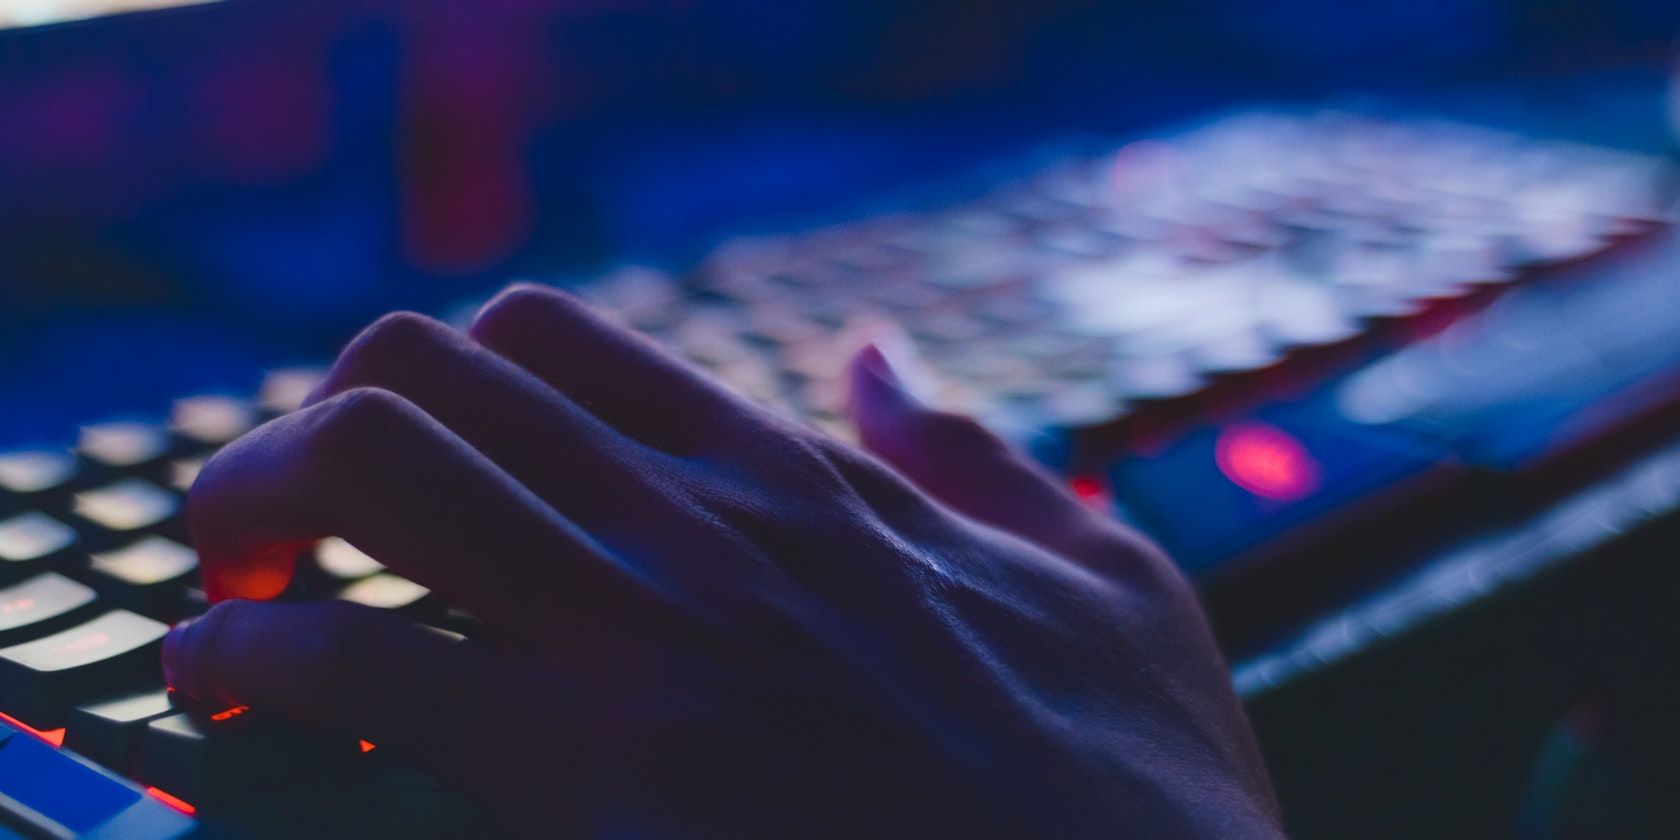 Pexels stock image of a hand typing on a glowing keyboard in the dark